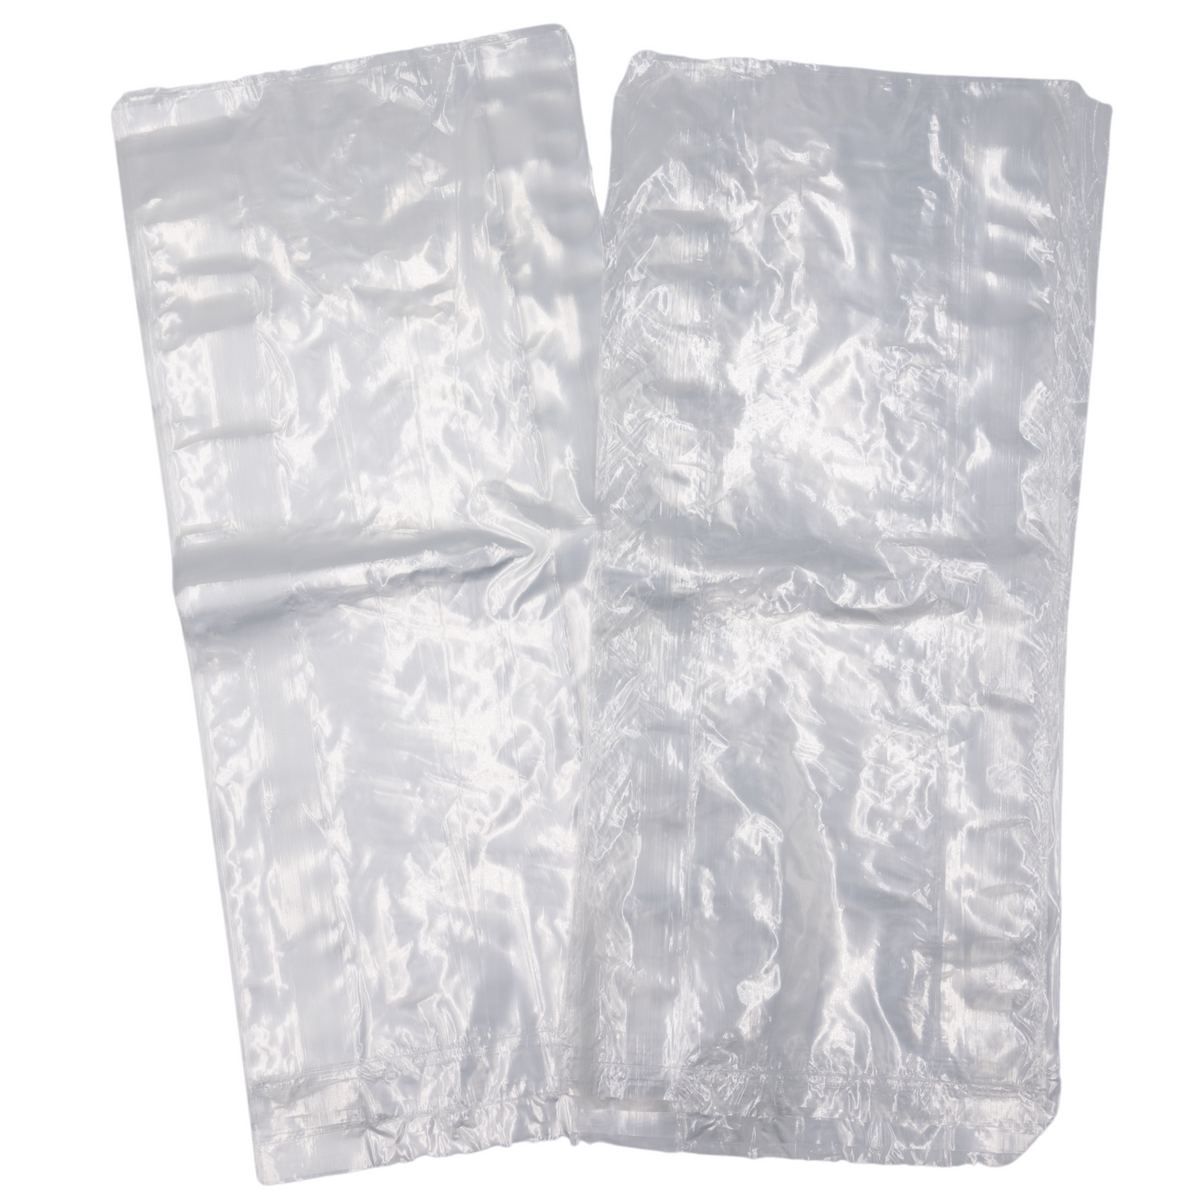 Plastic Bag-Clear LDPE Poly Vented Produce Bags 10X8x24 1.0 Mil 500 Bags/CS